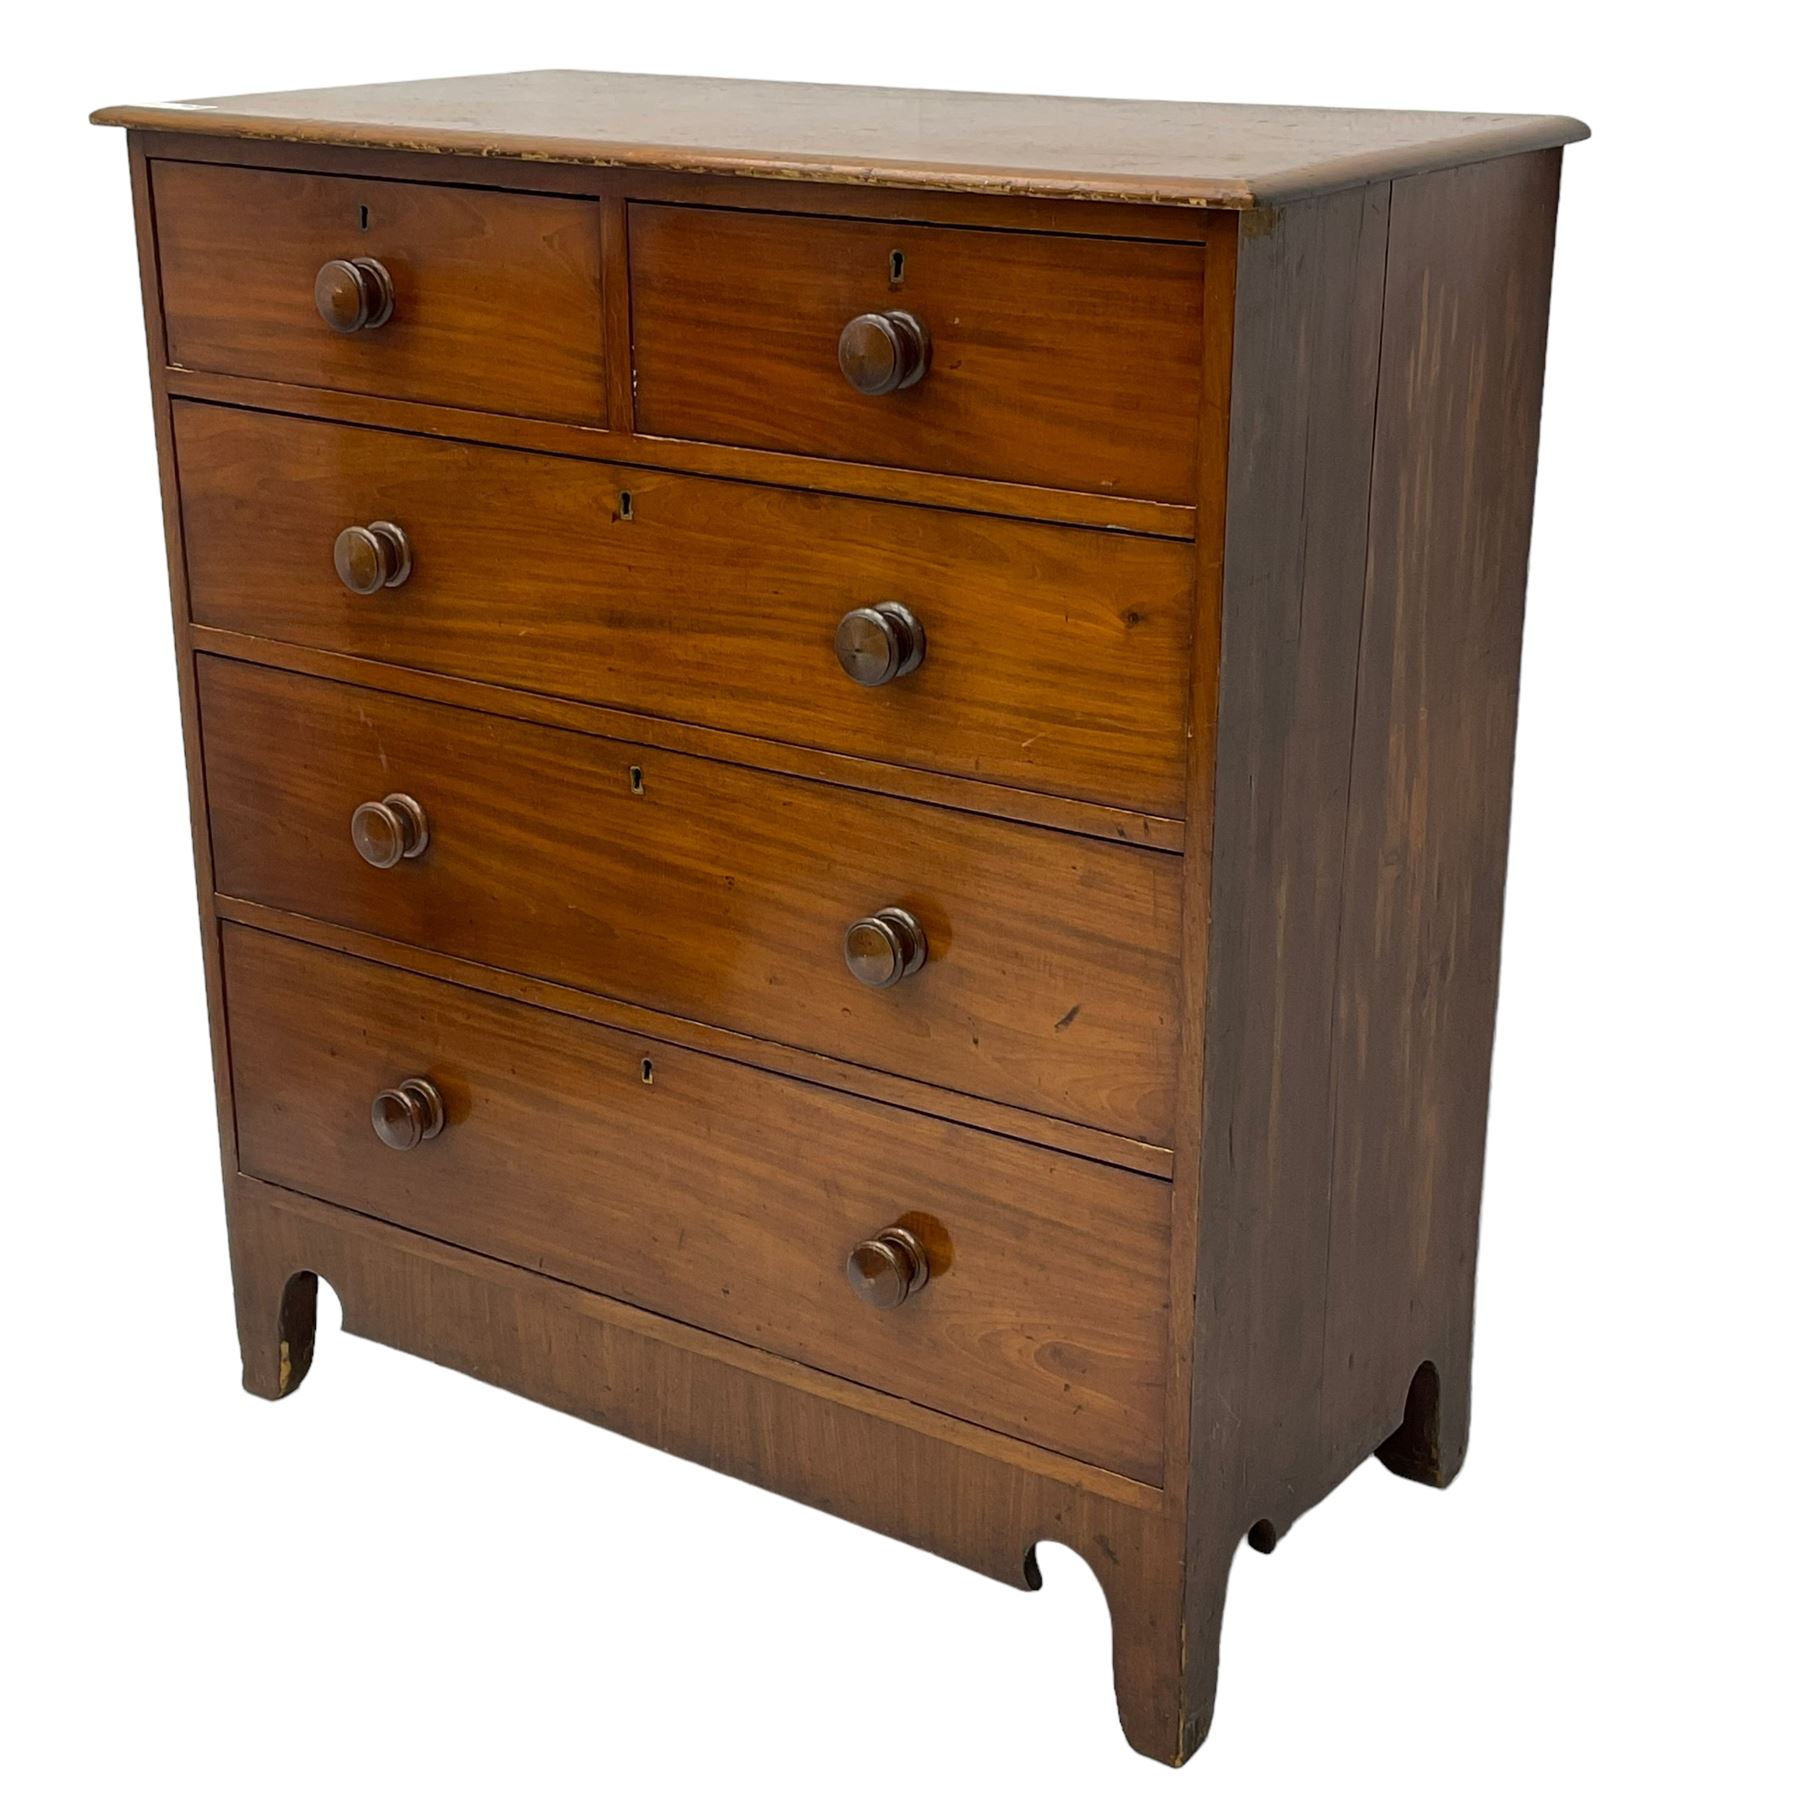 19th century mahogany and pine chest - Image 3 of 8